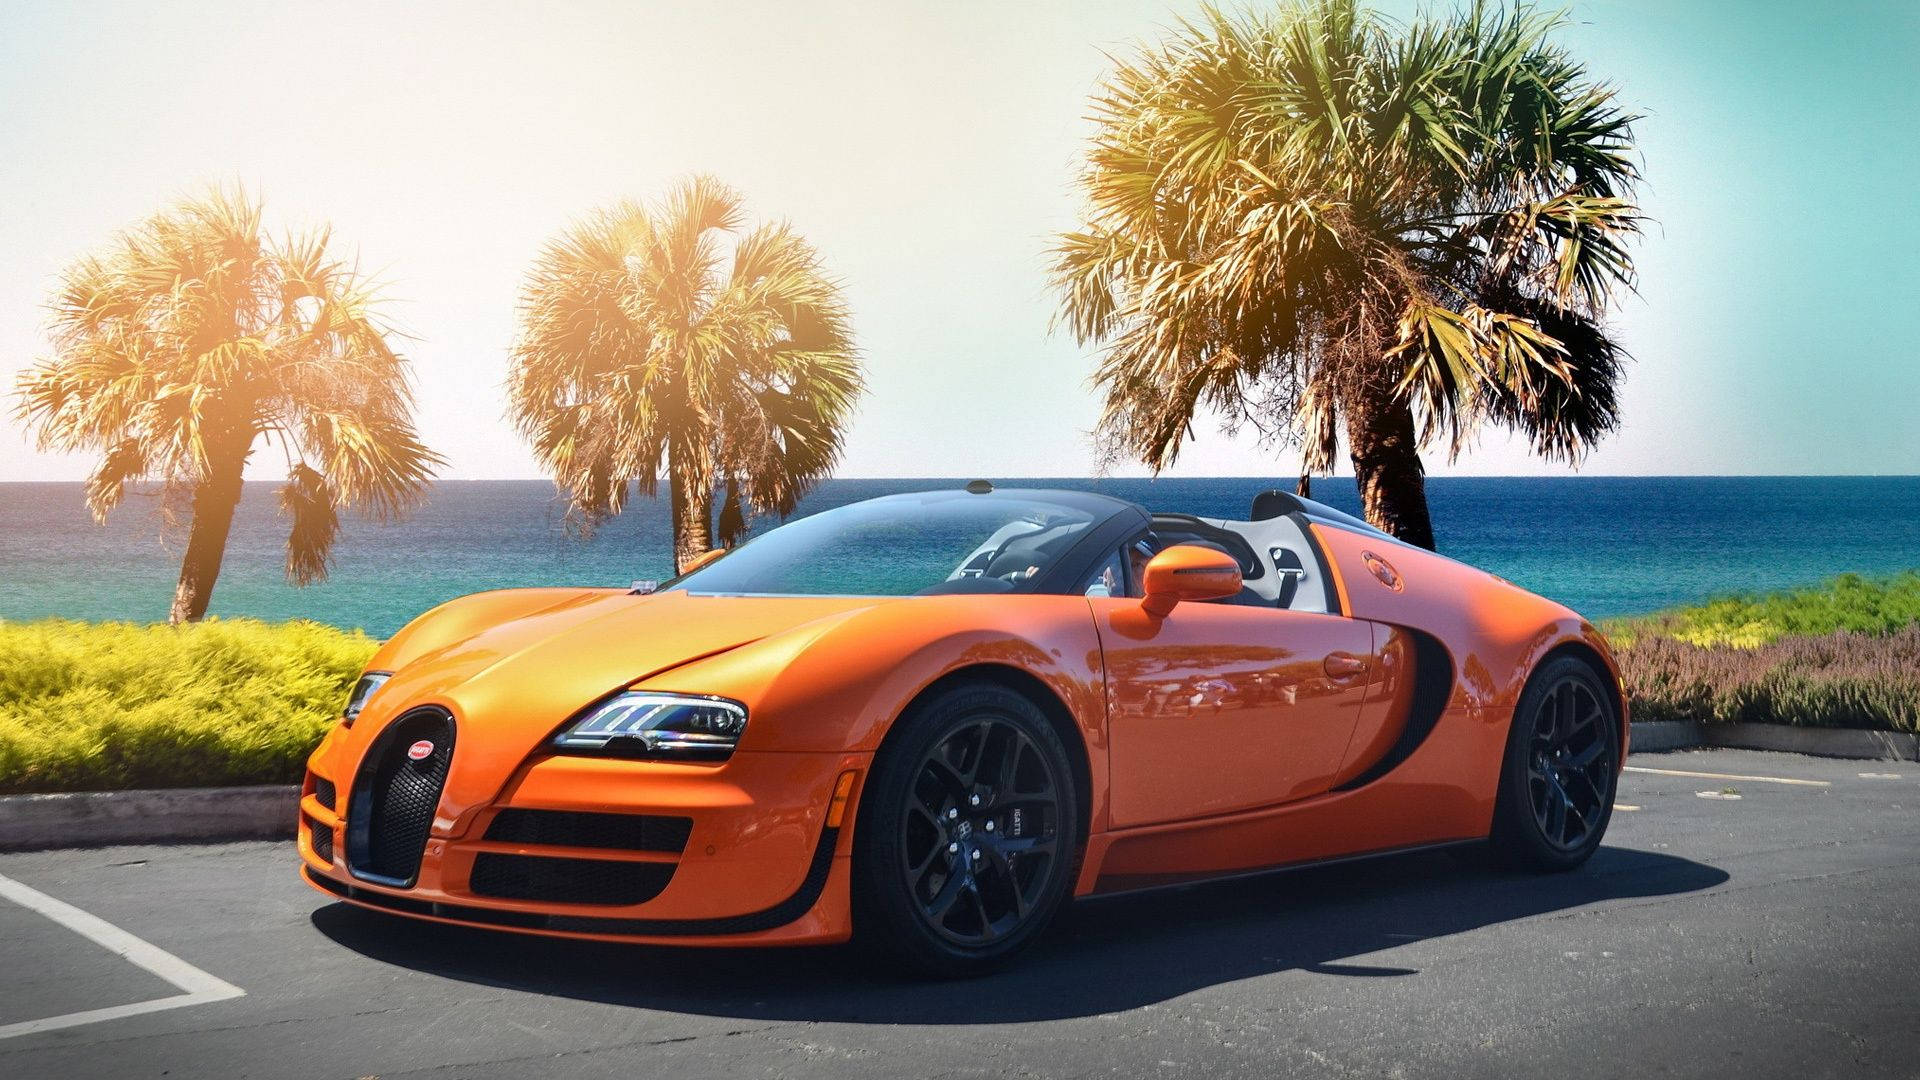 Cool Bugatti With Palm Trees